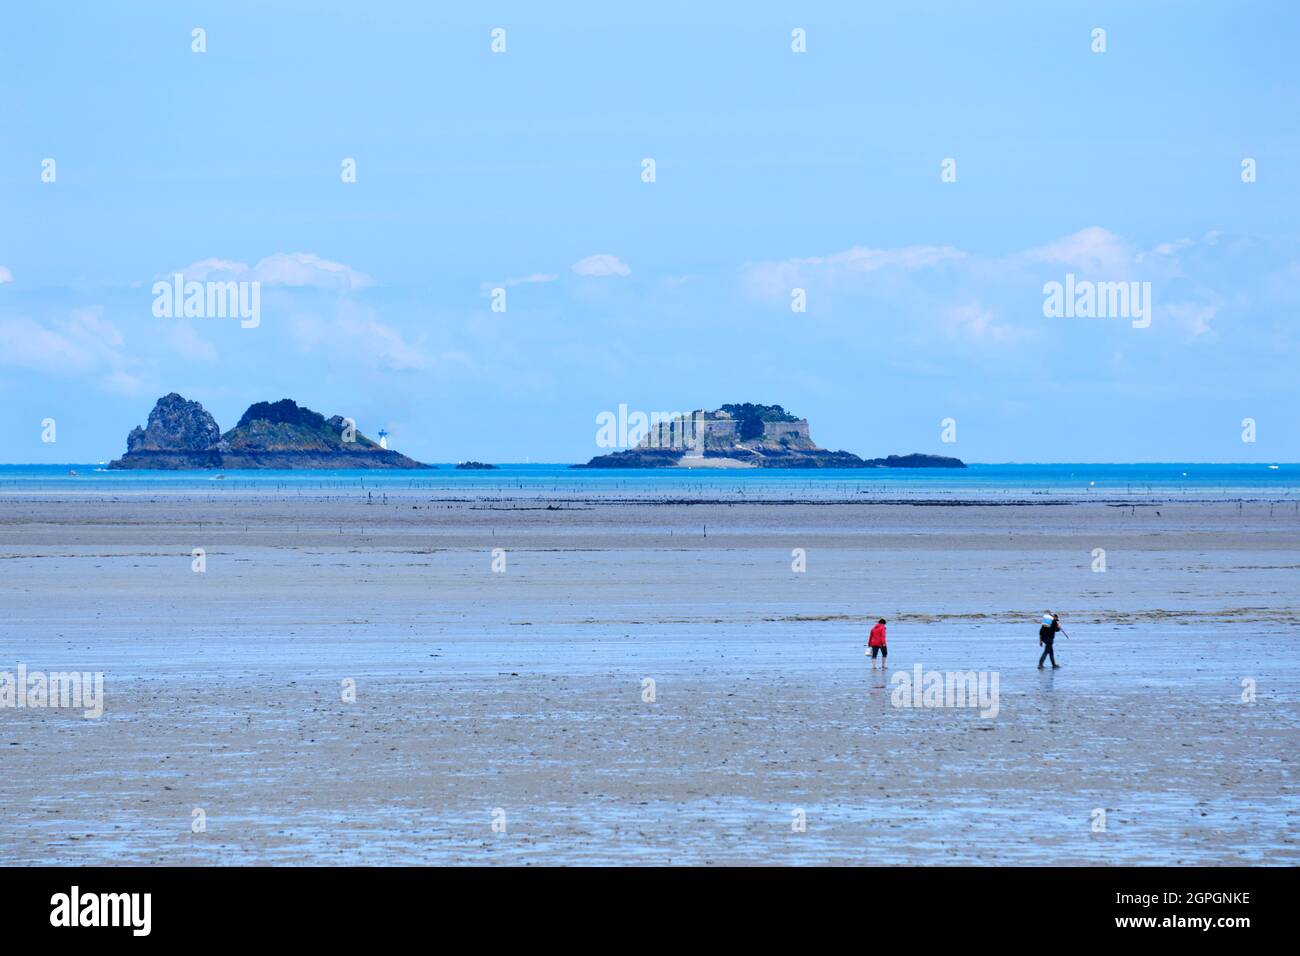 France, Ille et Vilaine, Emerald Coast, Mont Saint Michel Bay, listed as World Heritage by UNESCO, Saint Benoît des Ondes, fishermen on foot in the bay at low tide, island of Rimains in the background Stock Photo